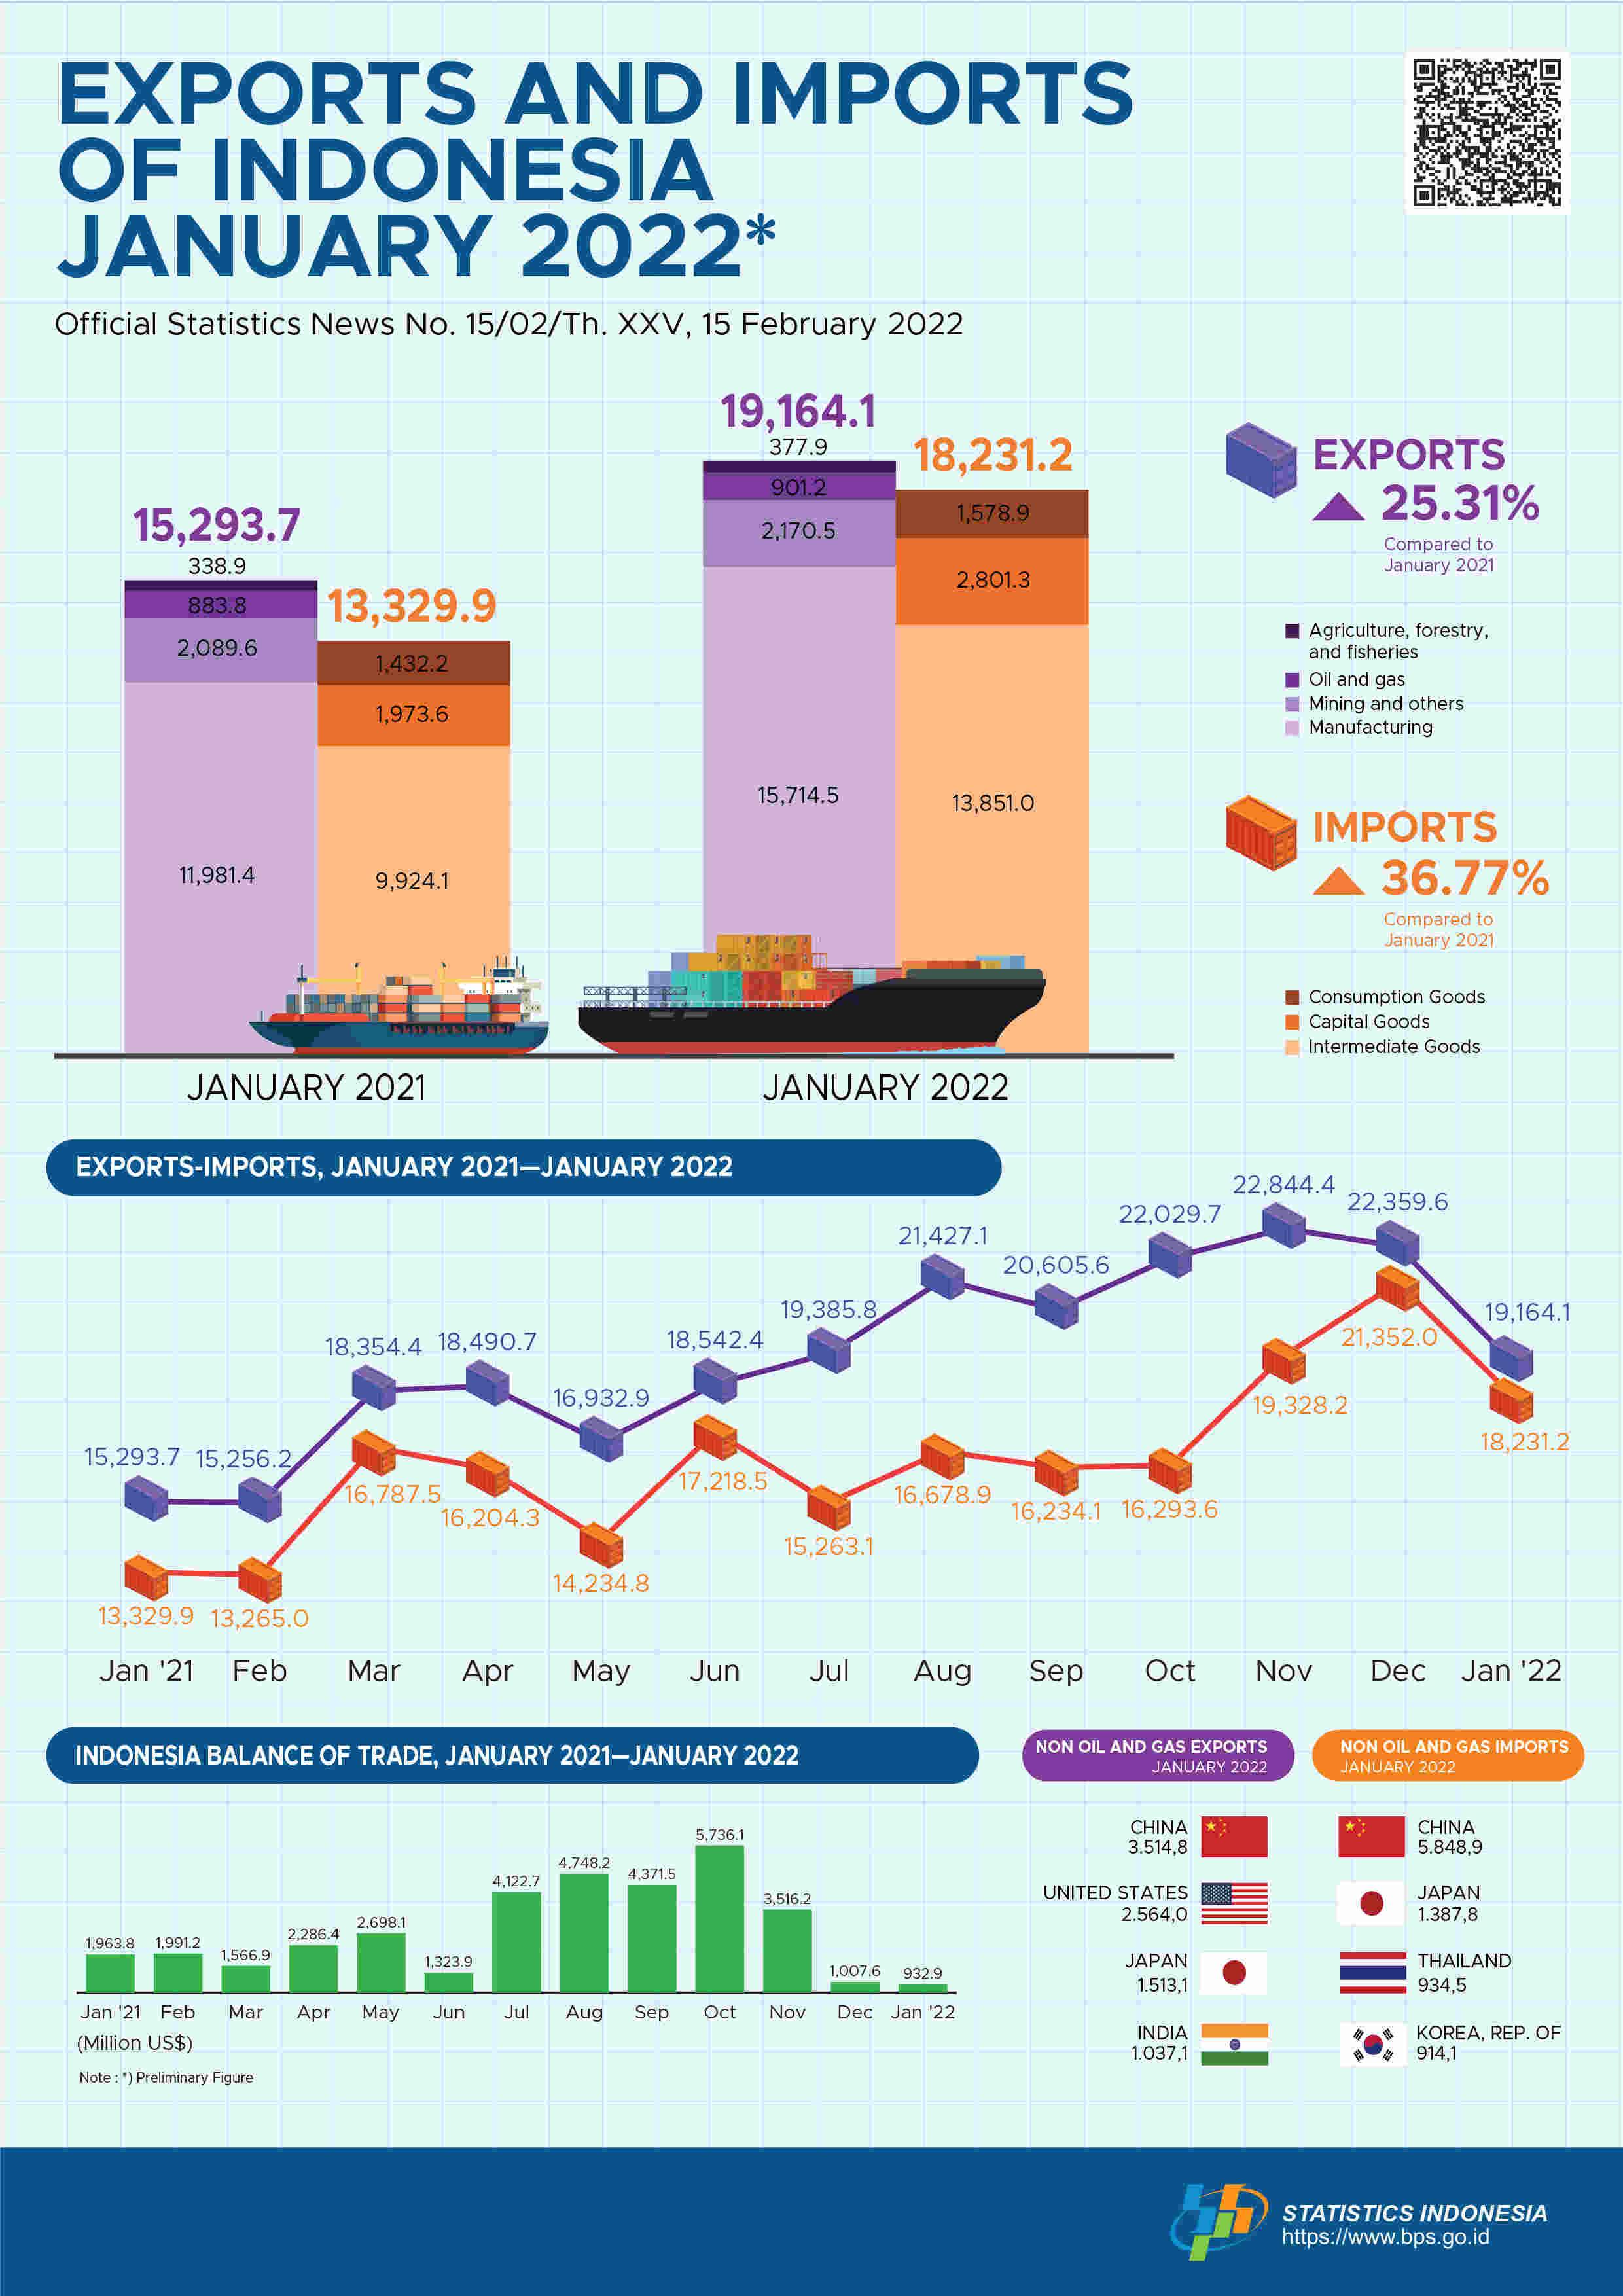 Exports in January 2022 reached US$19.16 billion and Imports in January 2022 reached US$18.23 billion